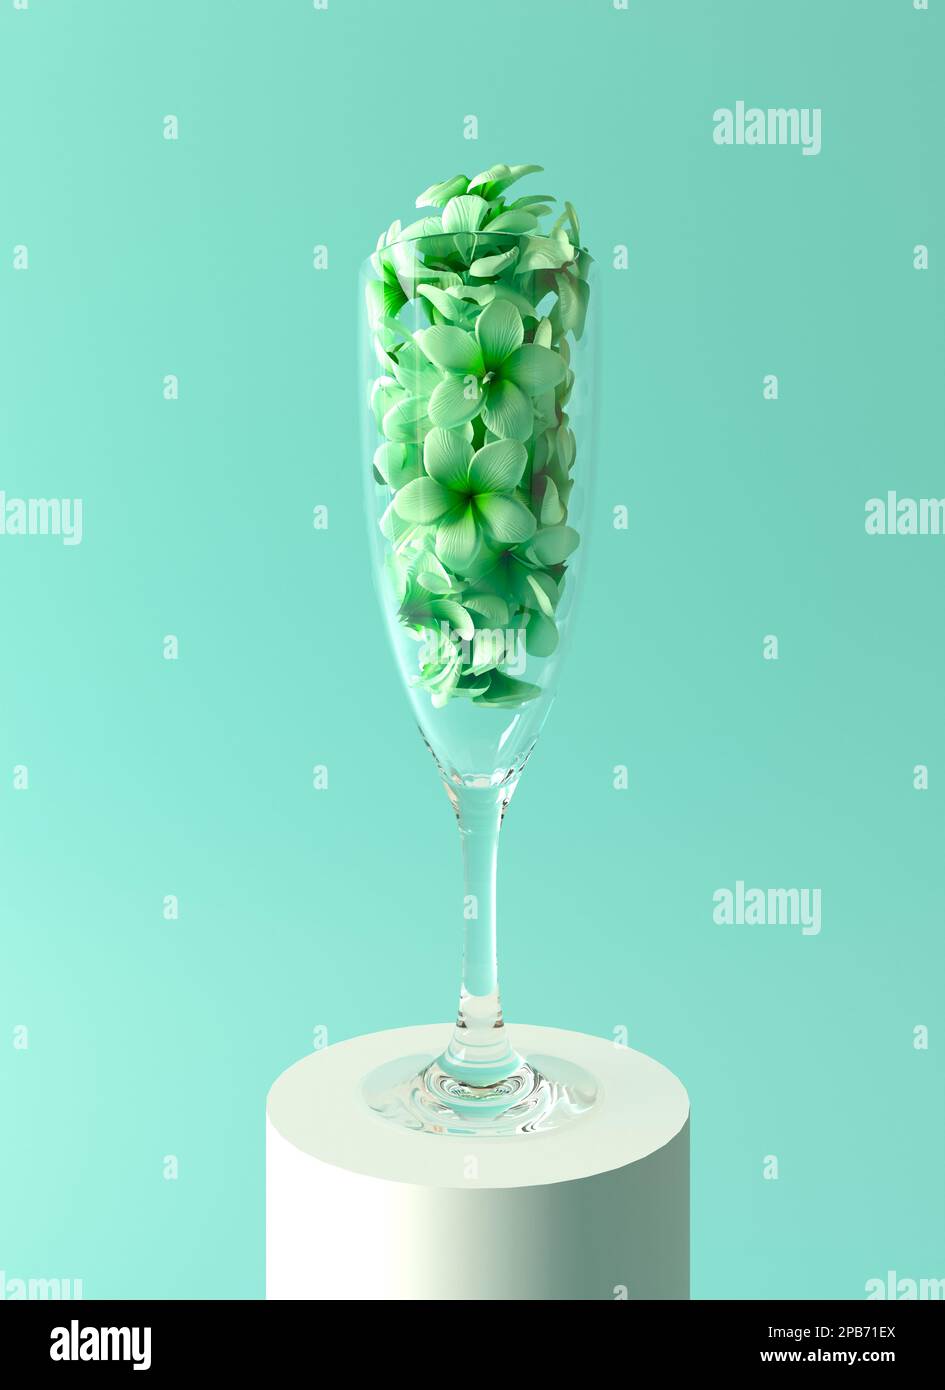 Little flowers inside a glass champagne glass, isolated on a mint green background. Easy style, minimal creative concept. 3d illustration Stock Photo